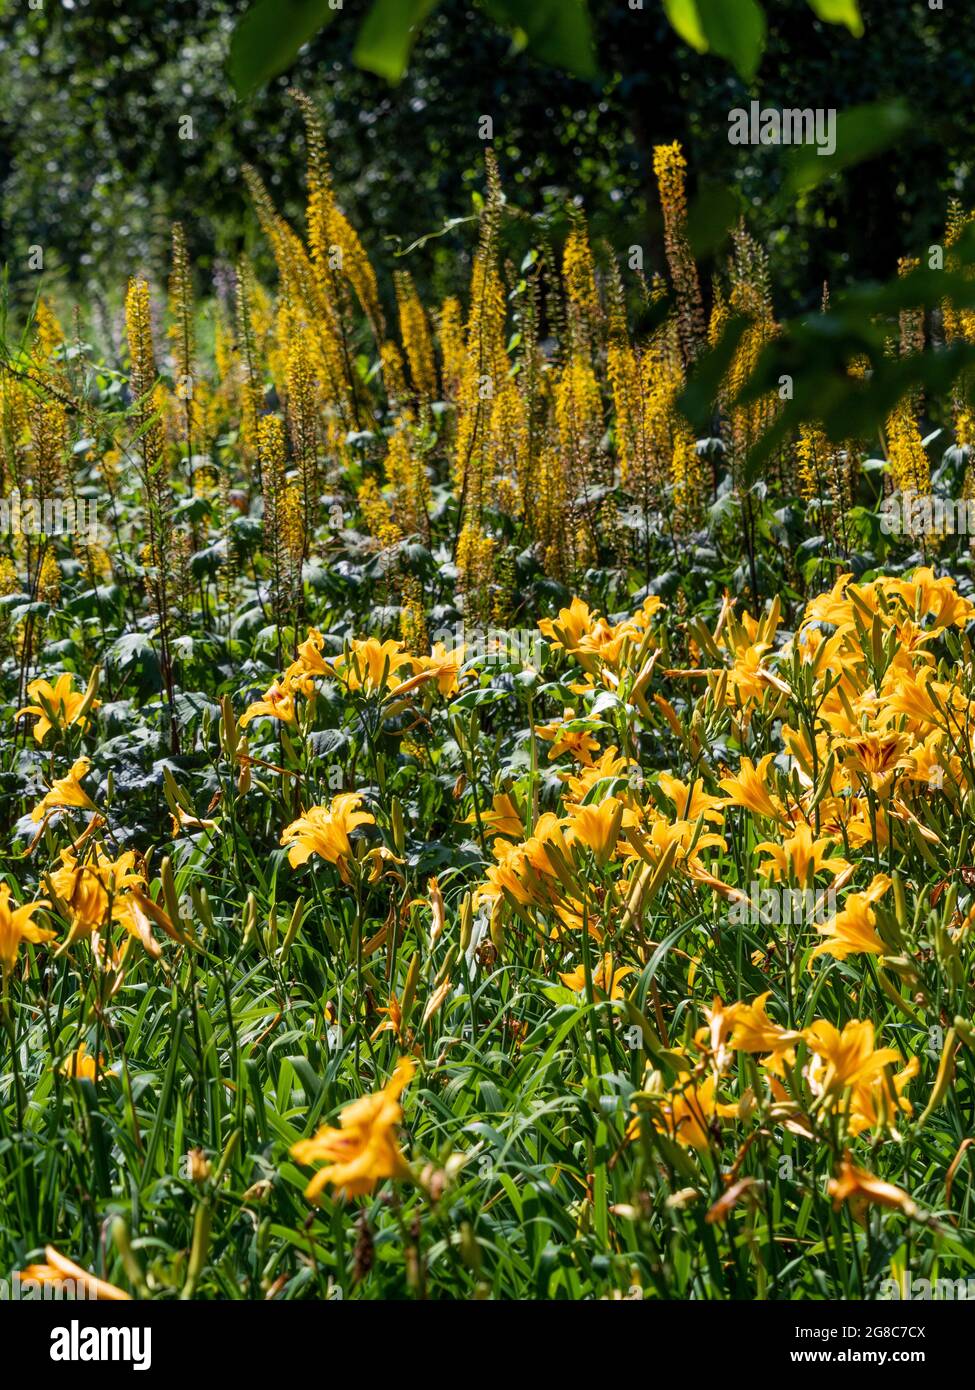 Flower bed with yellow and orange daylily and foxtail lilies growing in a UK garden Stock Photo